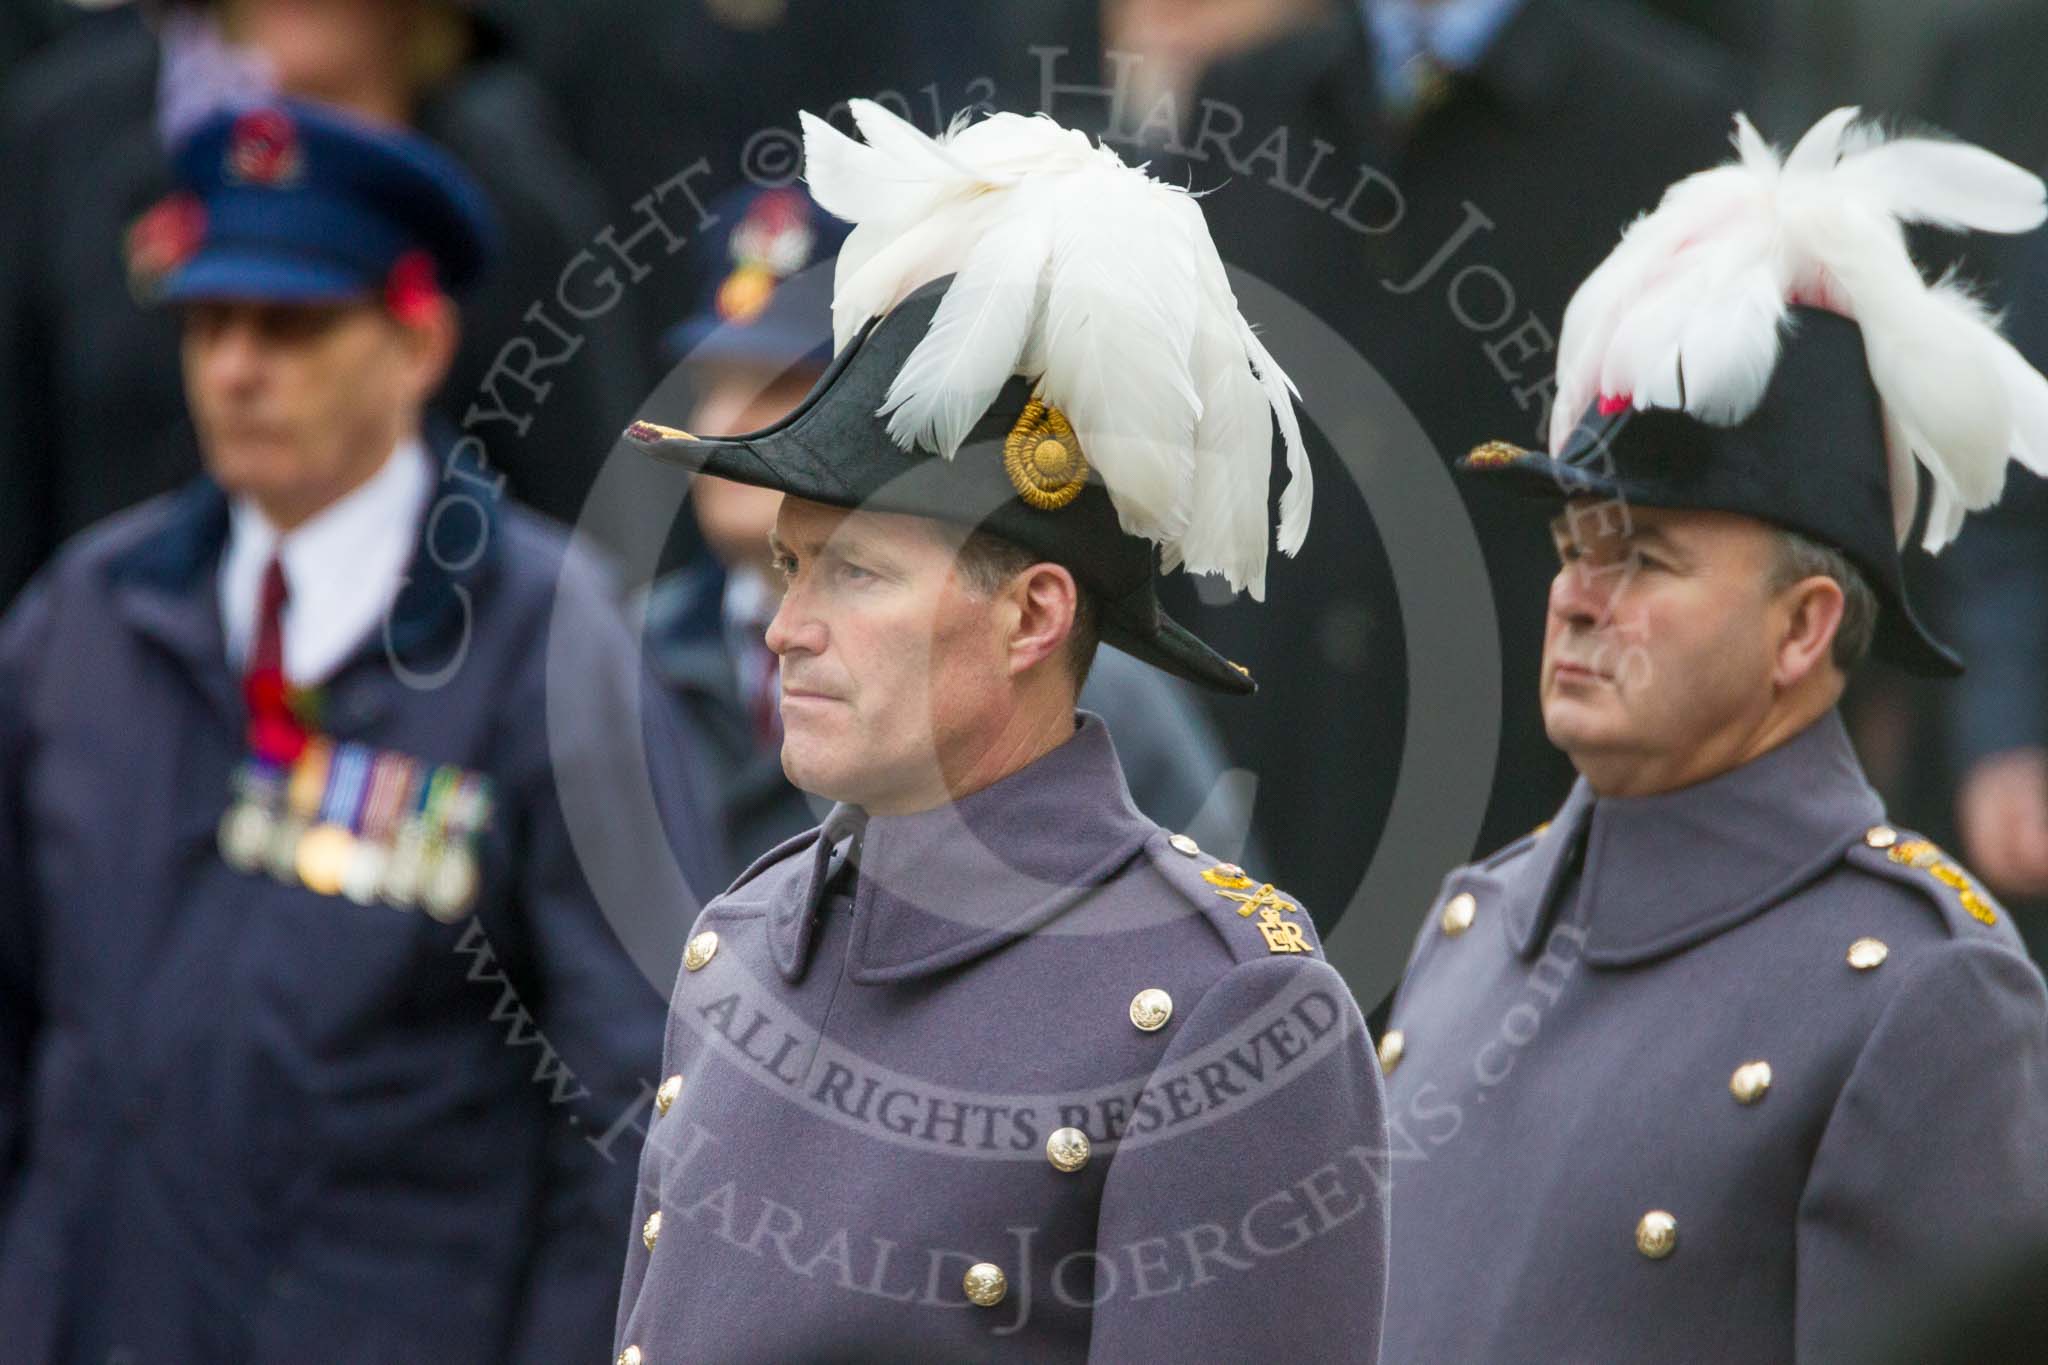 Remembrance Sunday at the Cenotaph 2015: Major-General Edward Alexander Smyth-Osbourne, General Officer Commanding the London District, and behind him Colonel Hugh Bodington, Chief of Staff at Headquarters London District & Headquarters Household Division. Image #327, 08 November 2015 11:23 Whitehall, London, UK